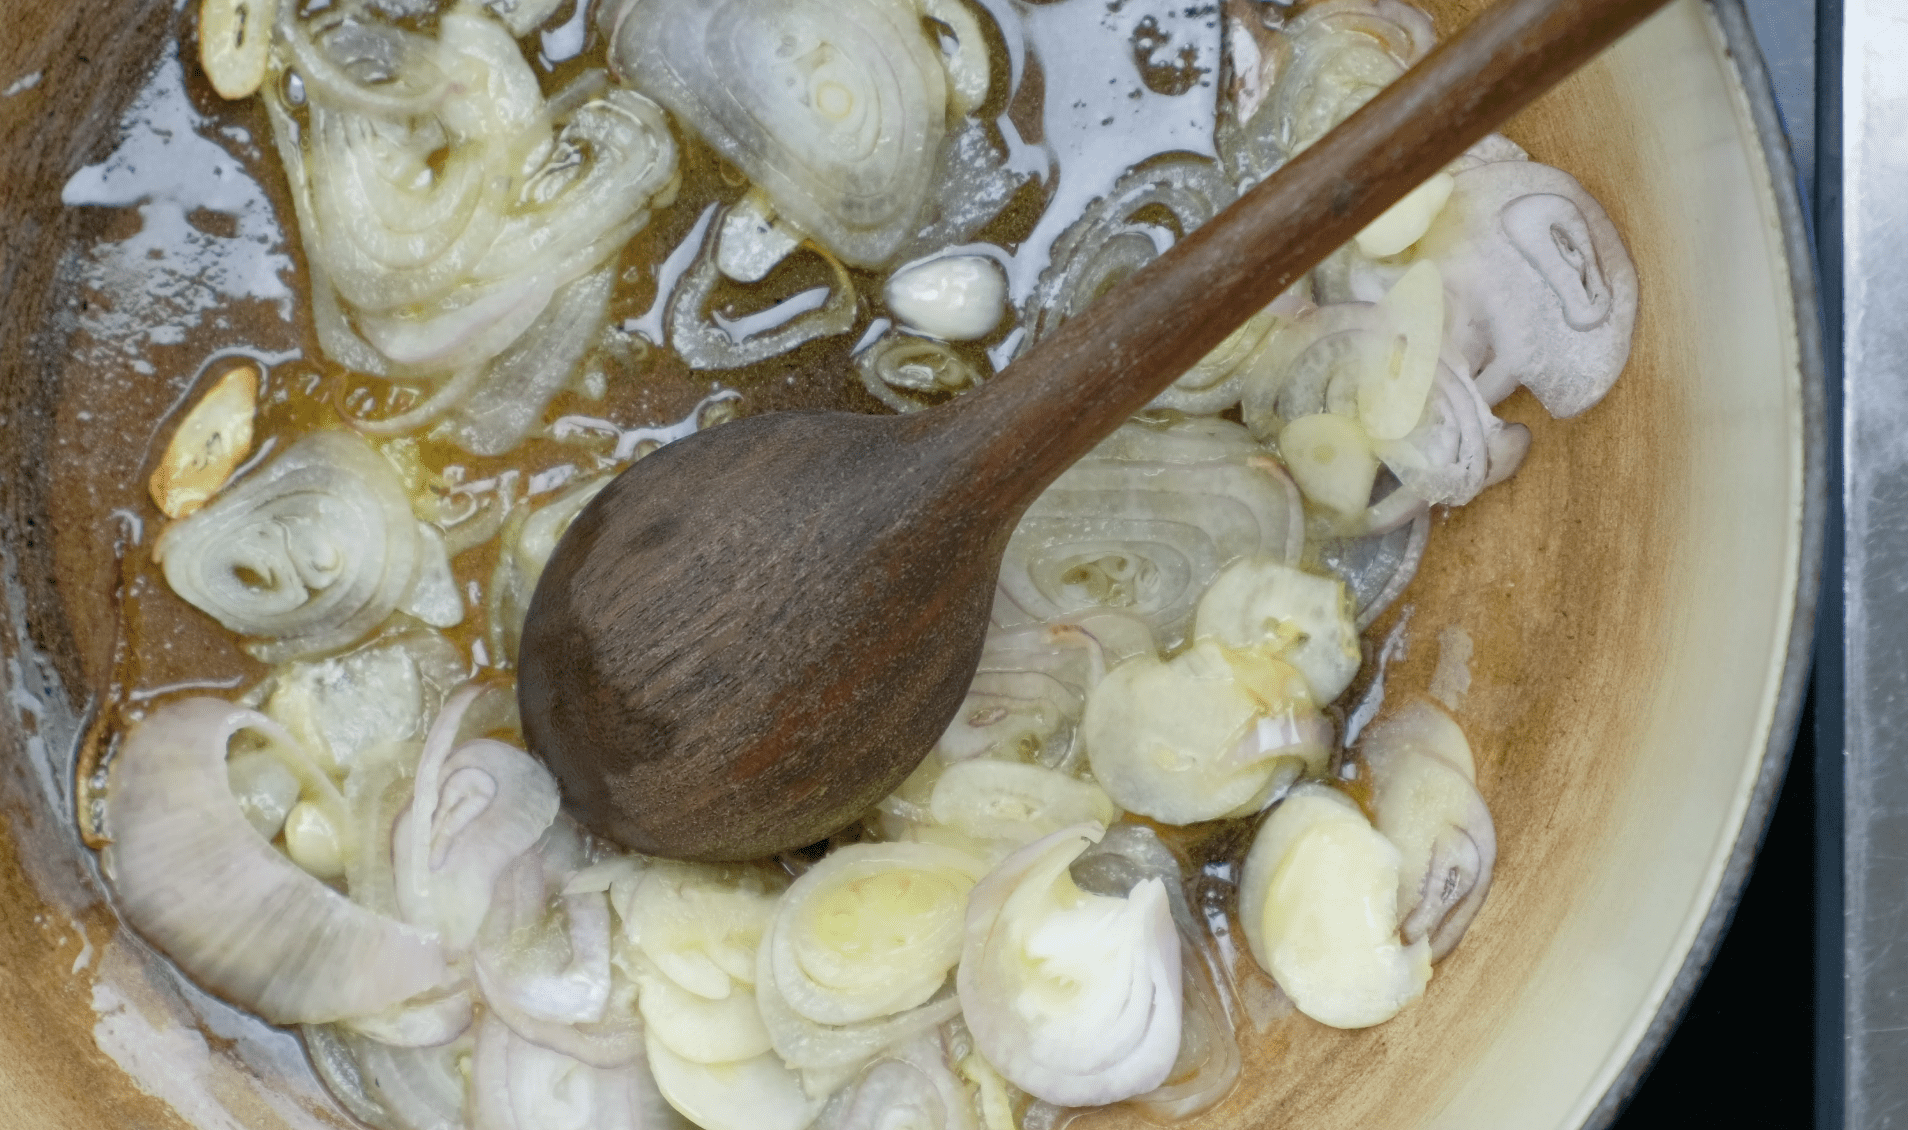 COOKING SHALLOTS_GARLIC FOR CREAMED SPINACH